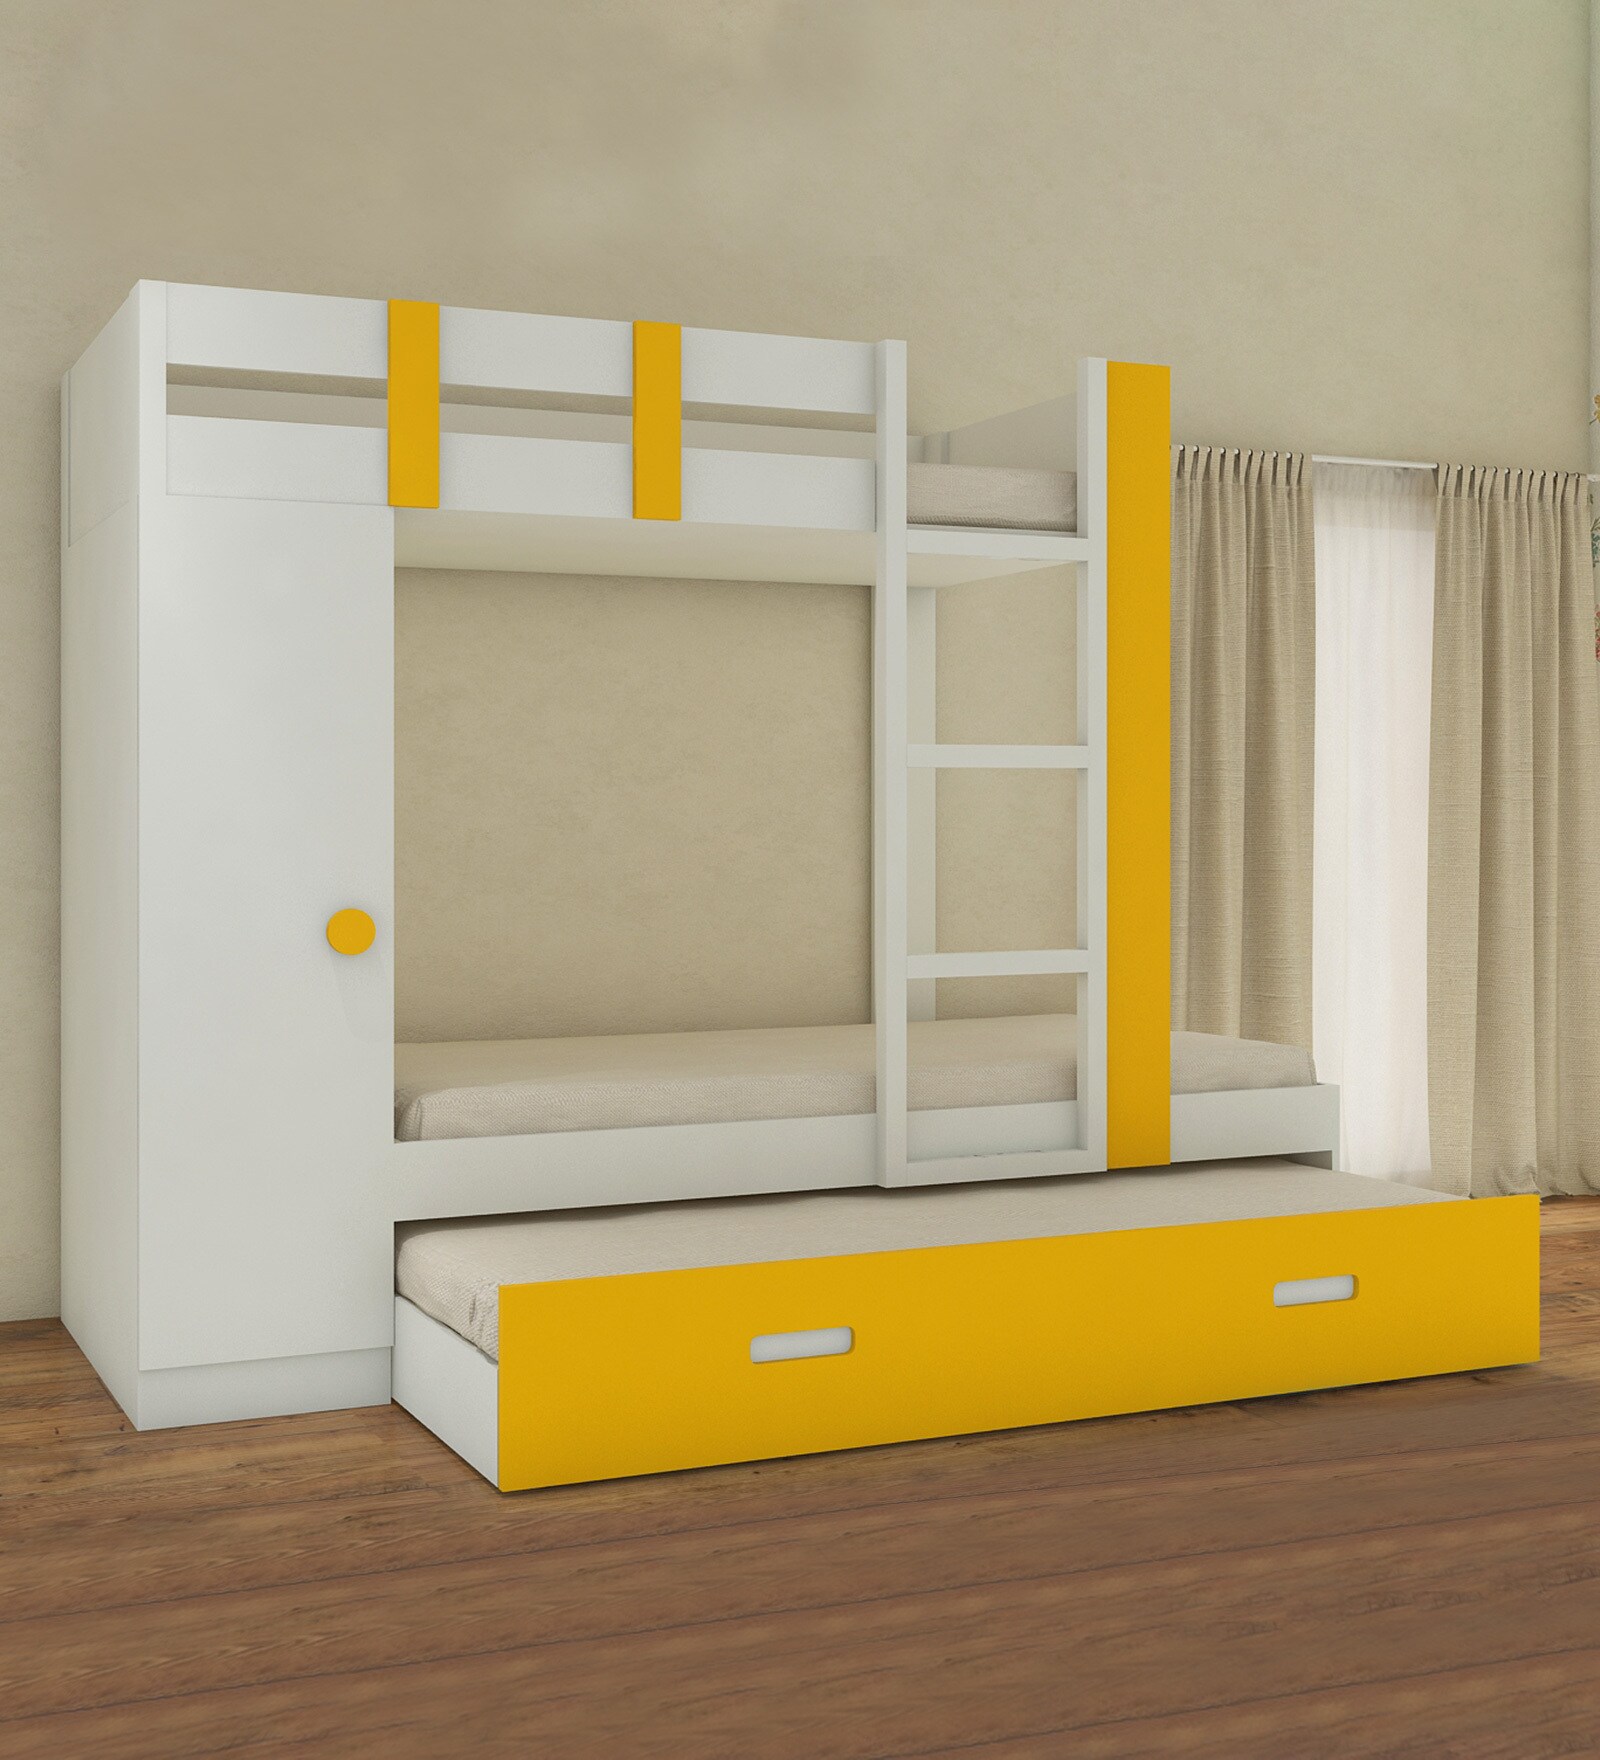 Buy Evita Bunk Bed In Yellow Colour With Drawer Storage At 23 Off By Adona Pepperfry 6522